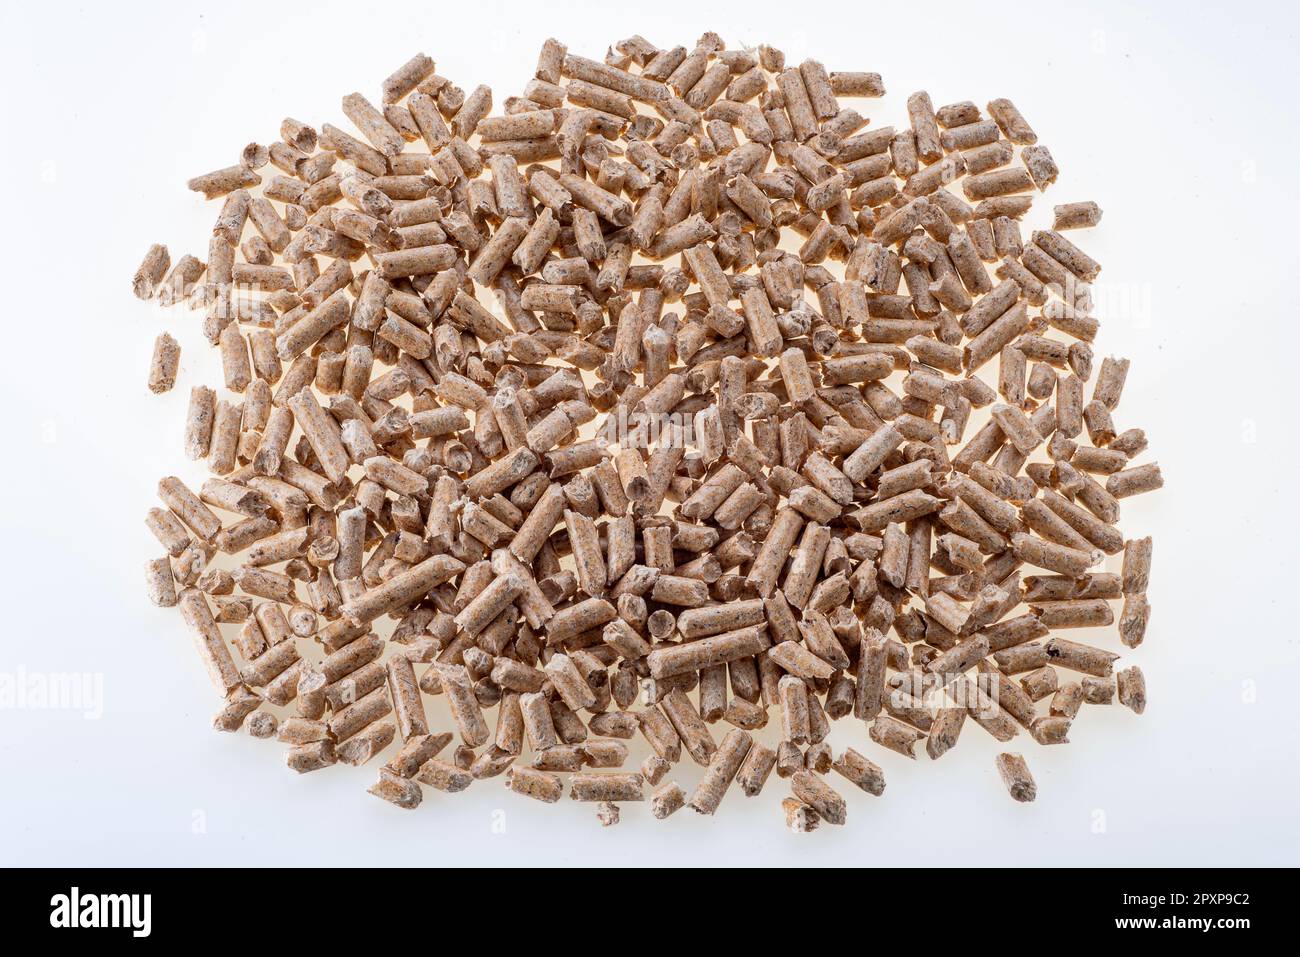 Wood pellets on white background in top view Stock Photo